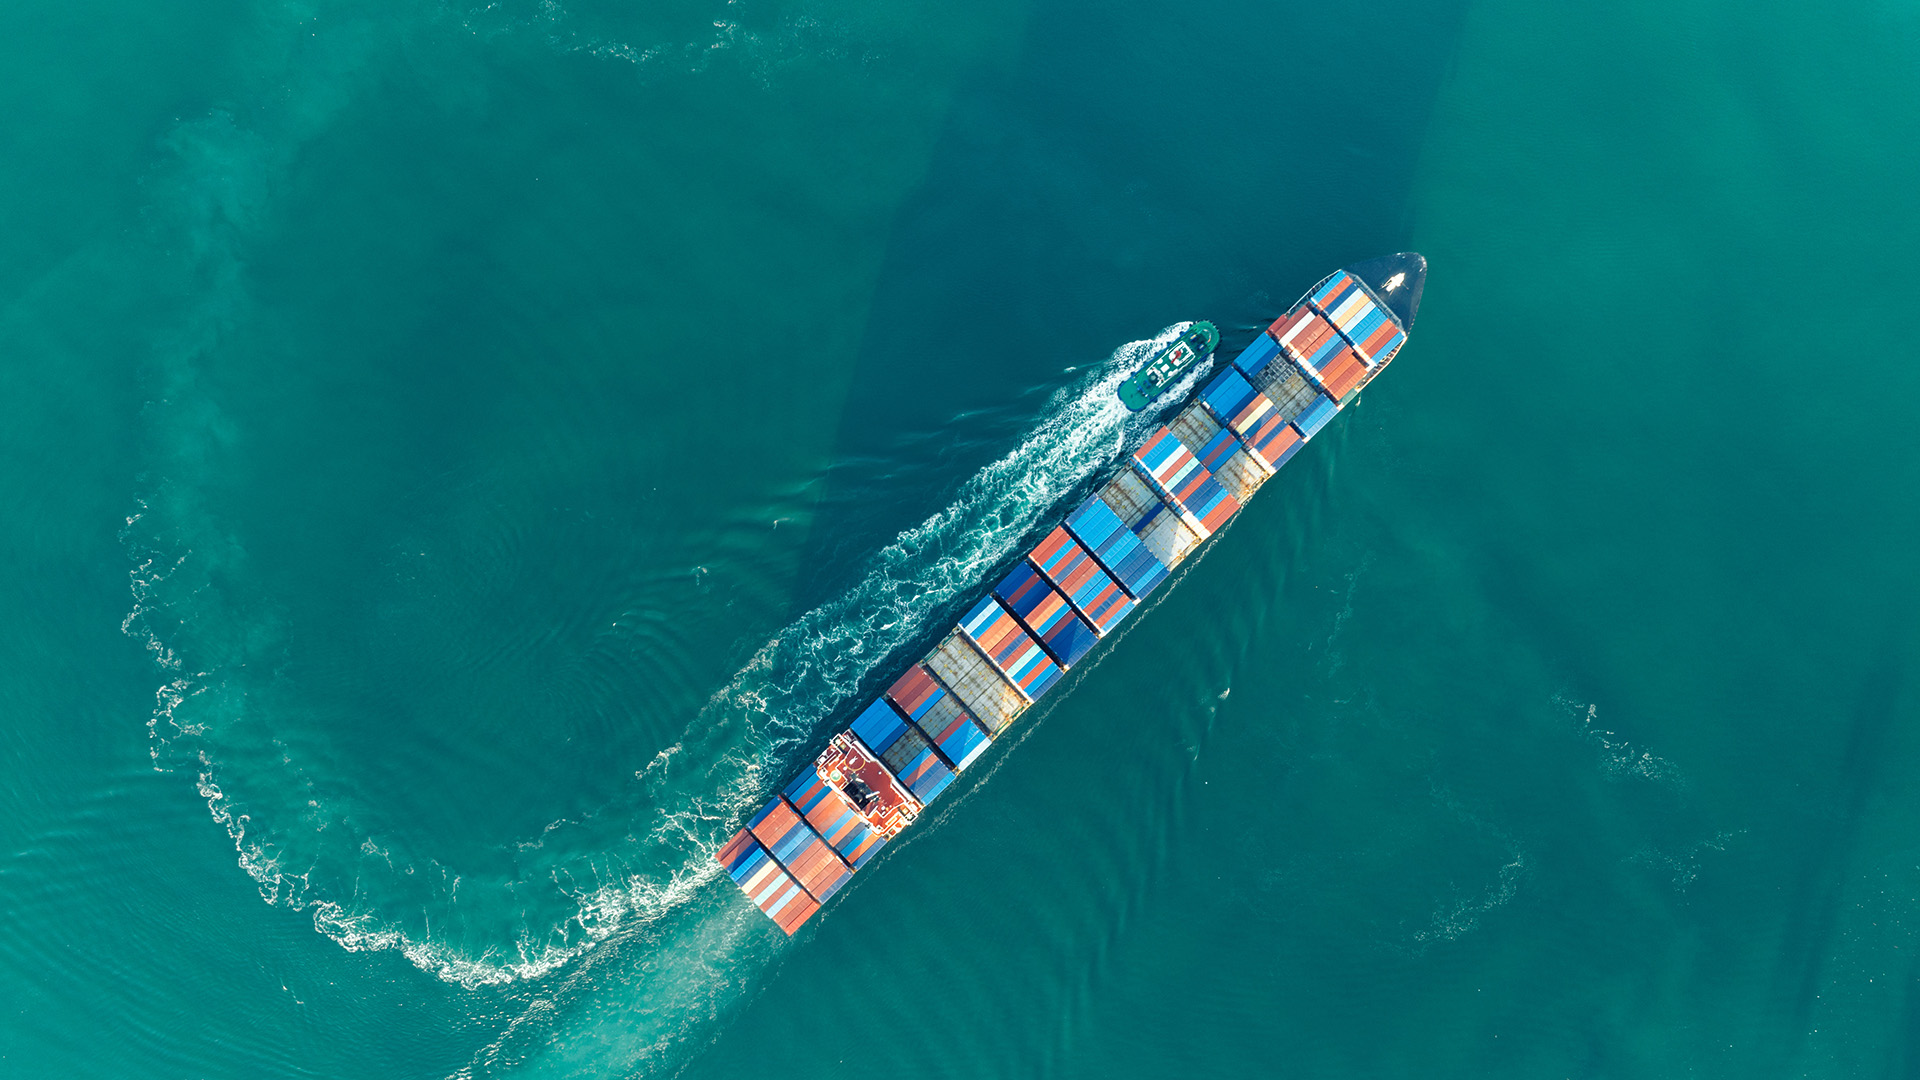 Five US agencies publish “Know Your Cargo” compliance note